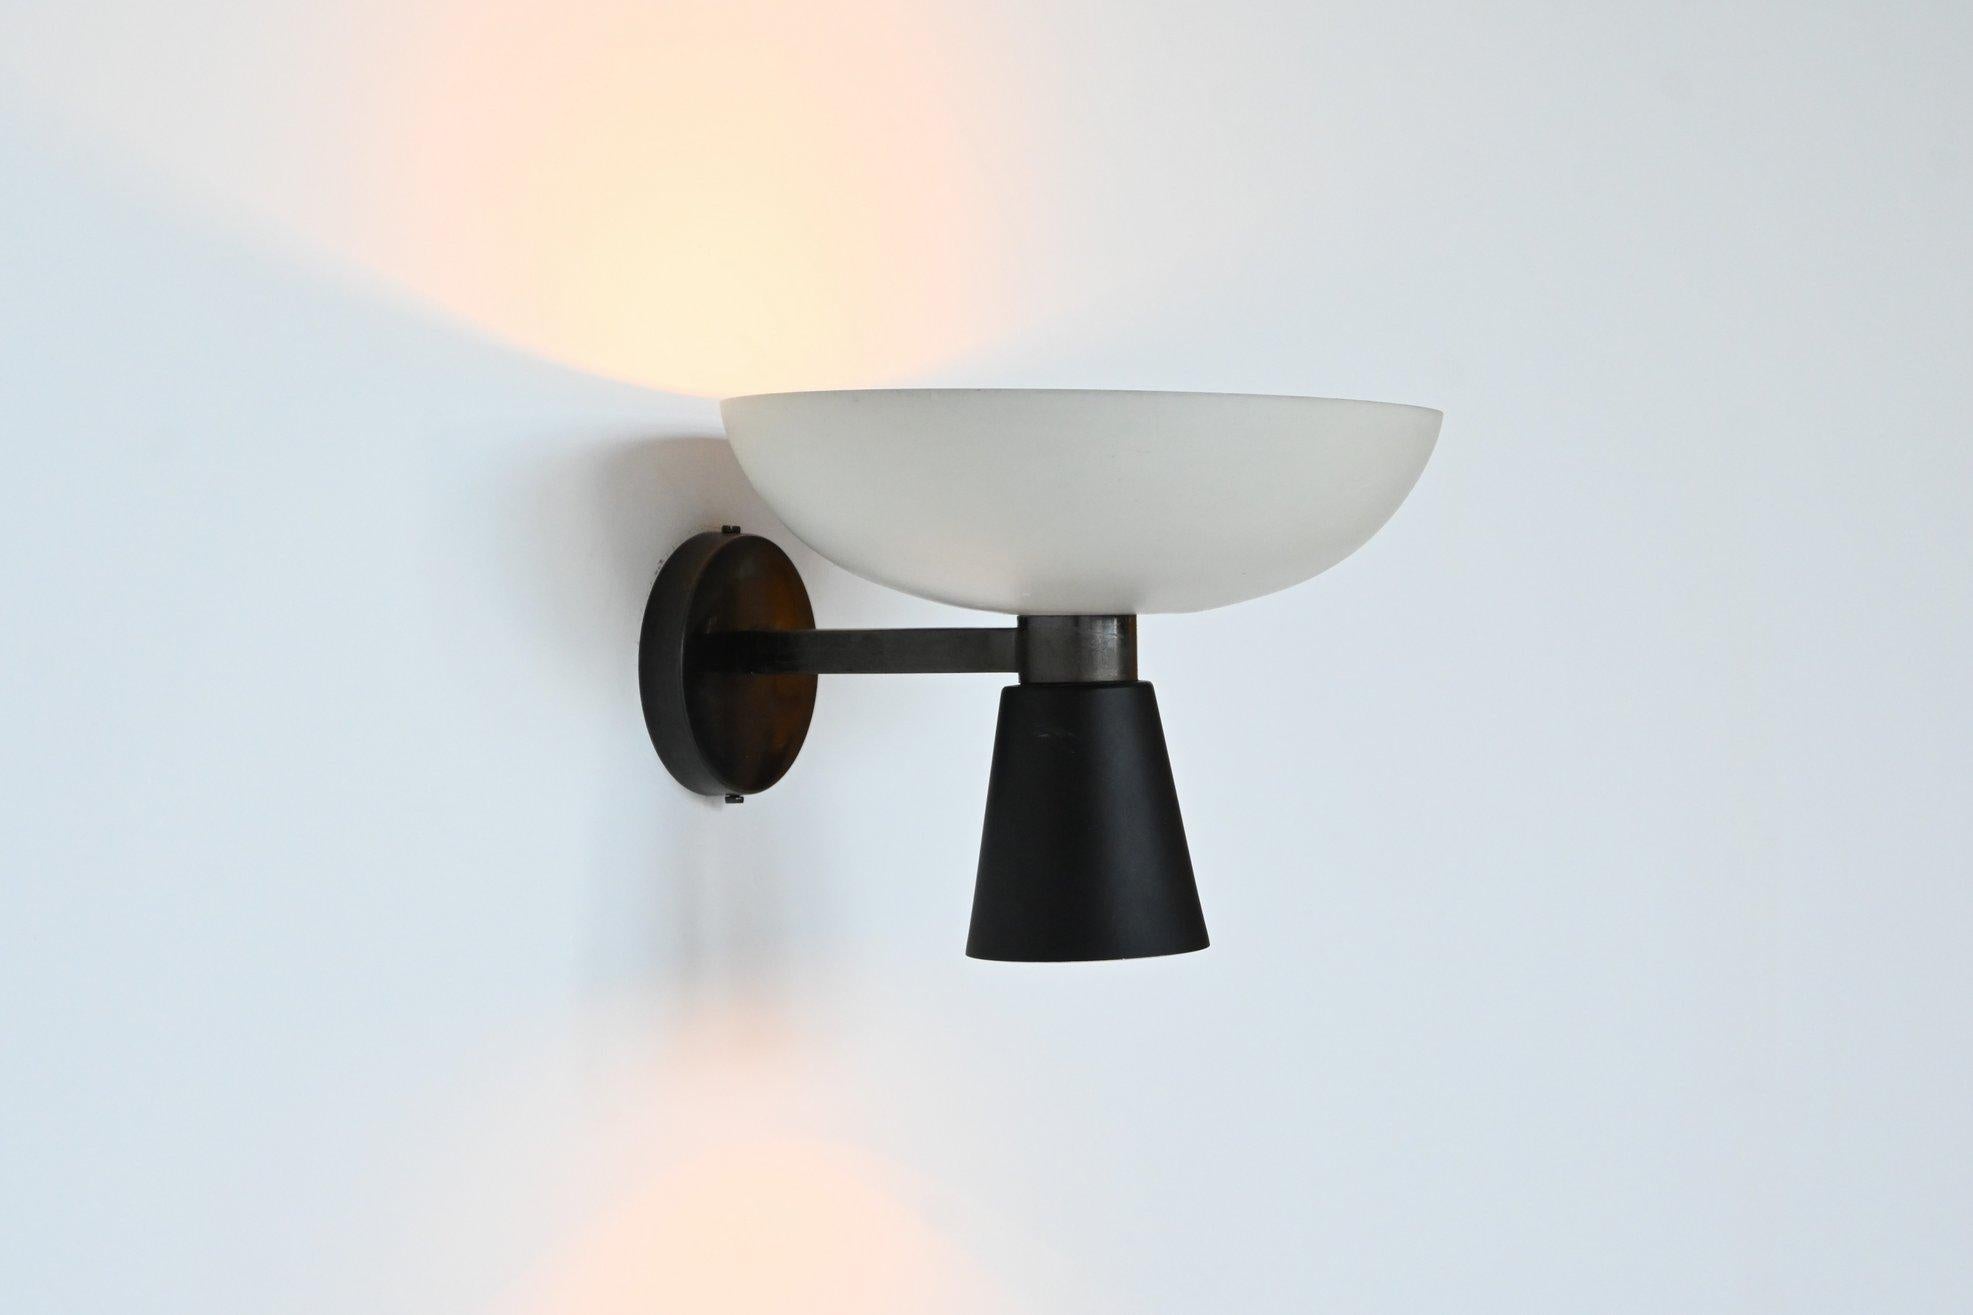 Beautiful diabolo shaped sconce attributed by Stilnovo, Italy 1950. The lamp has an original patinated brass arm and black and white metal shades. It gives light up and down and can be used both ways. The wall lamp is in very good original condition